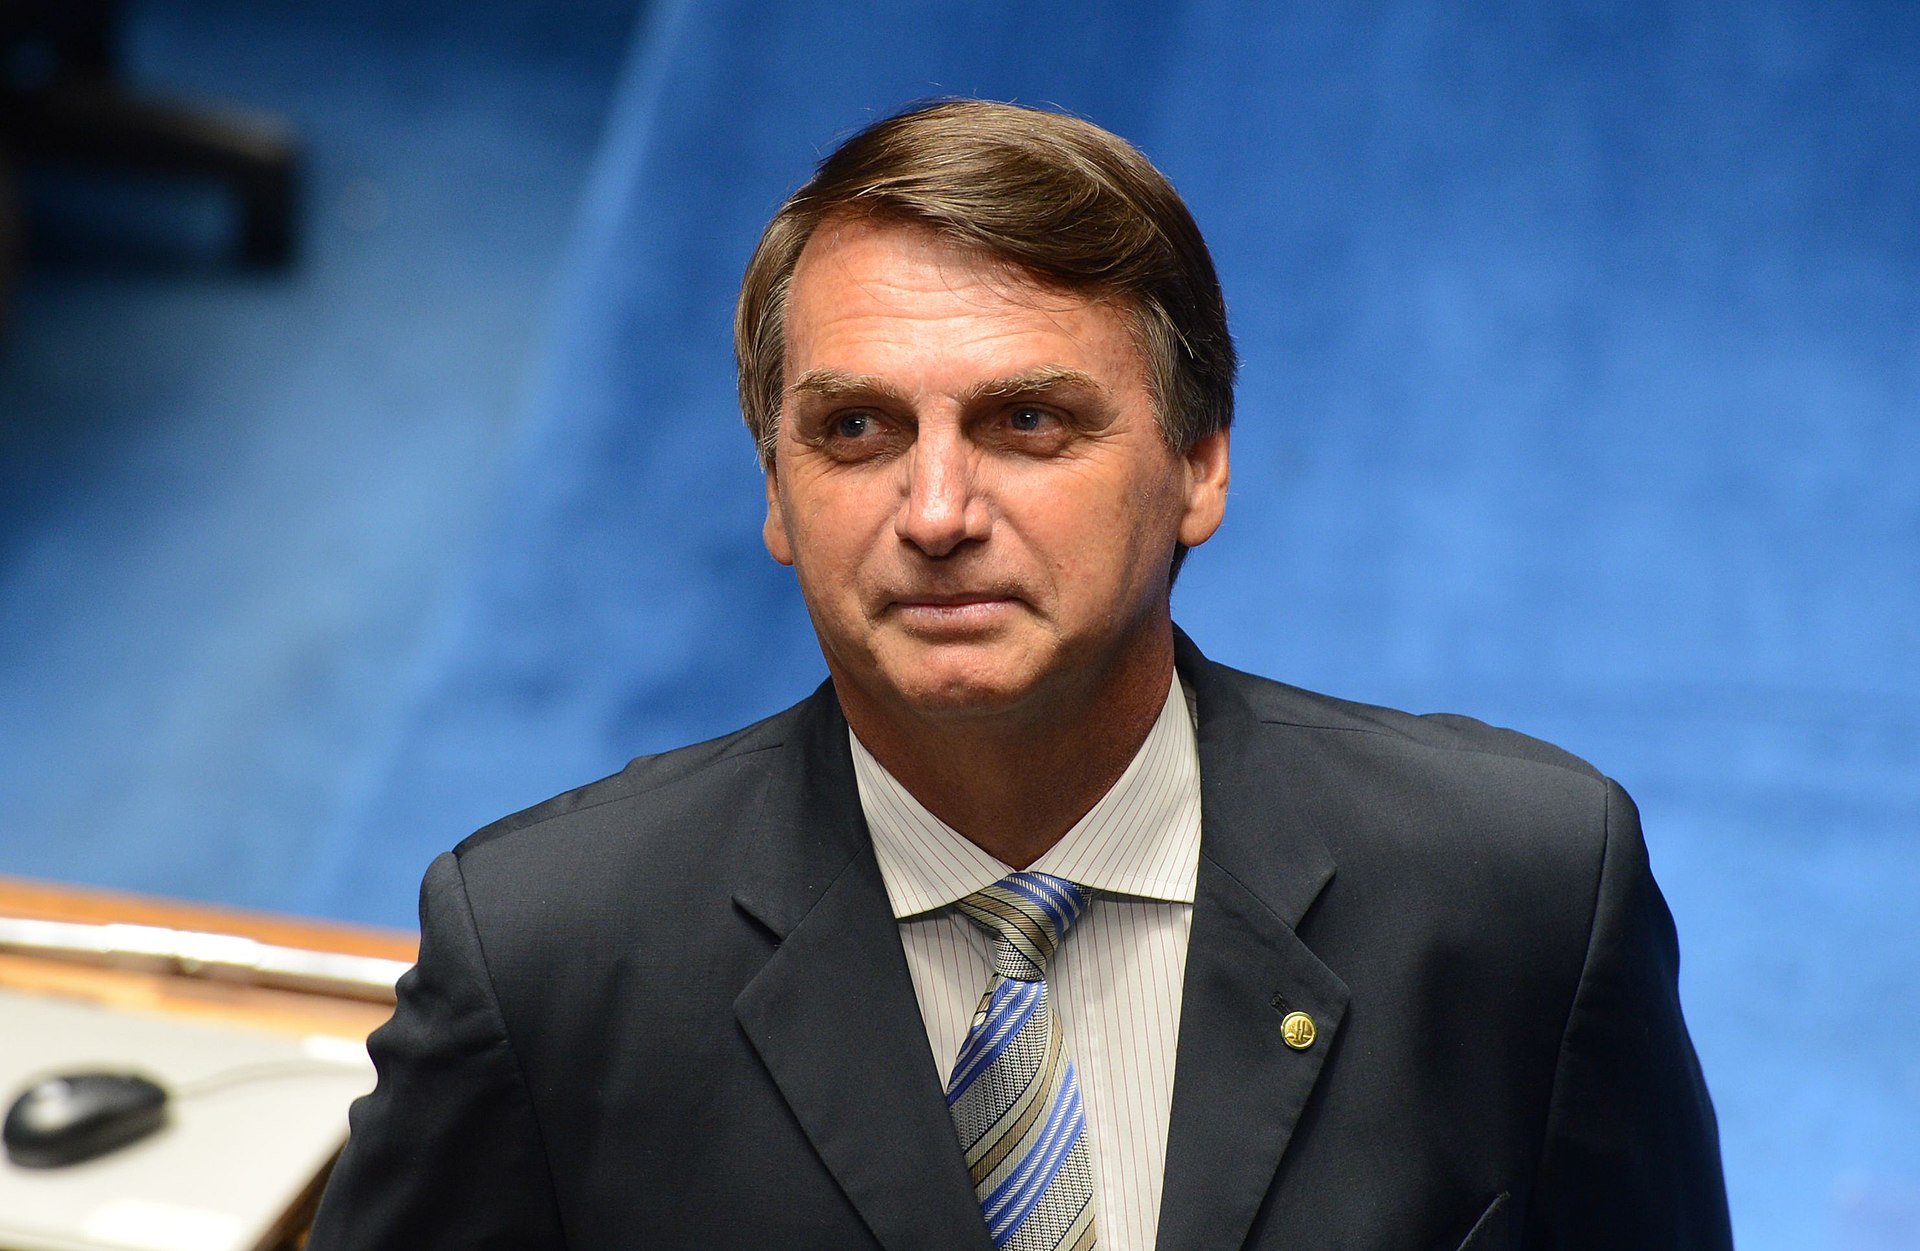 Brazil's New President Takes First Strike At LGBTQ Issues